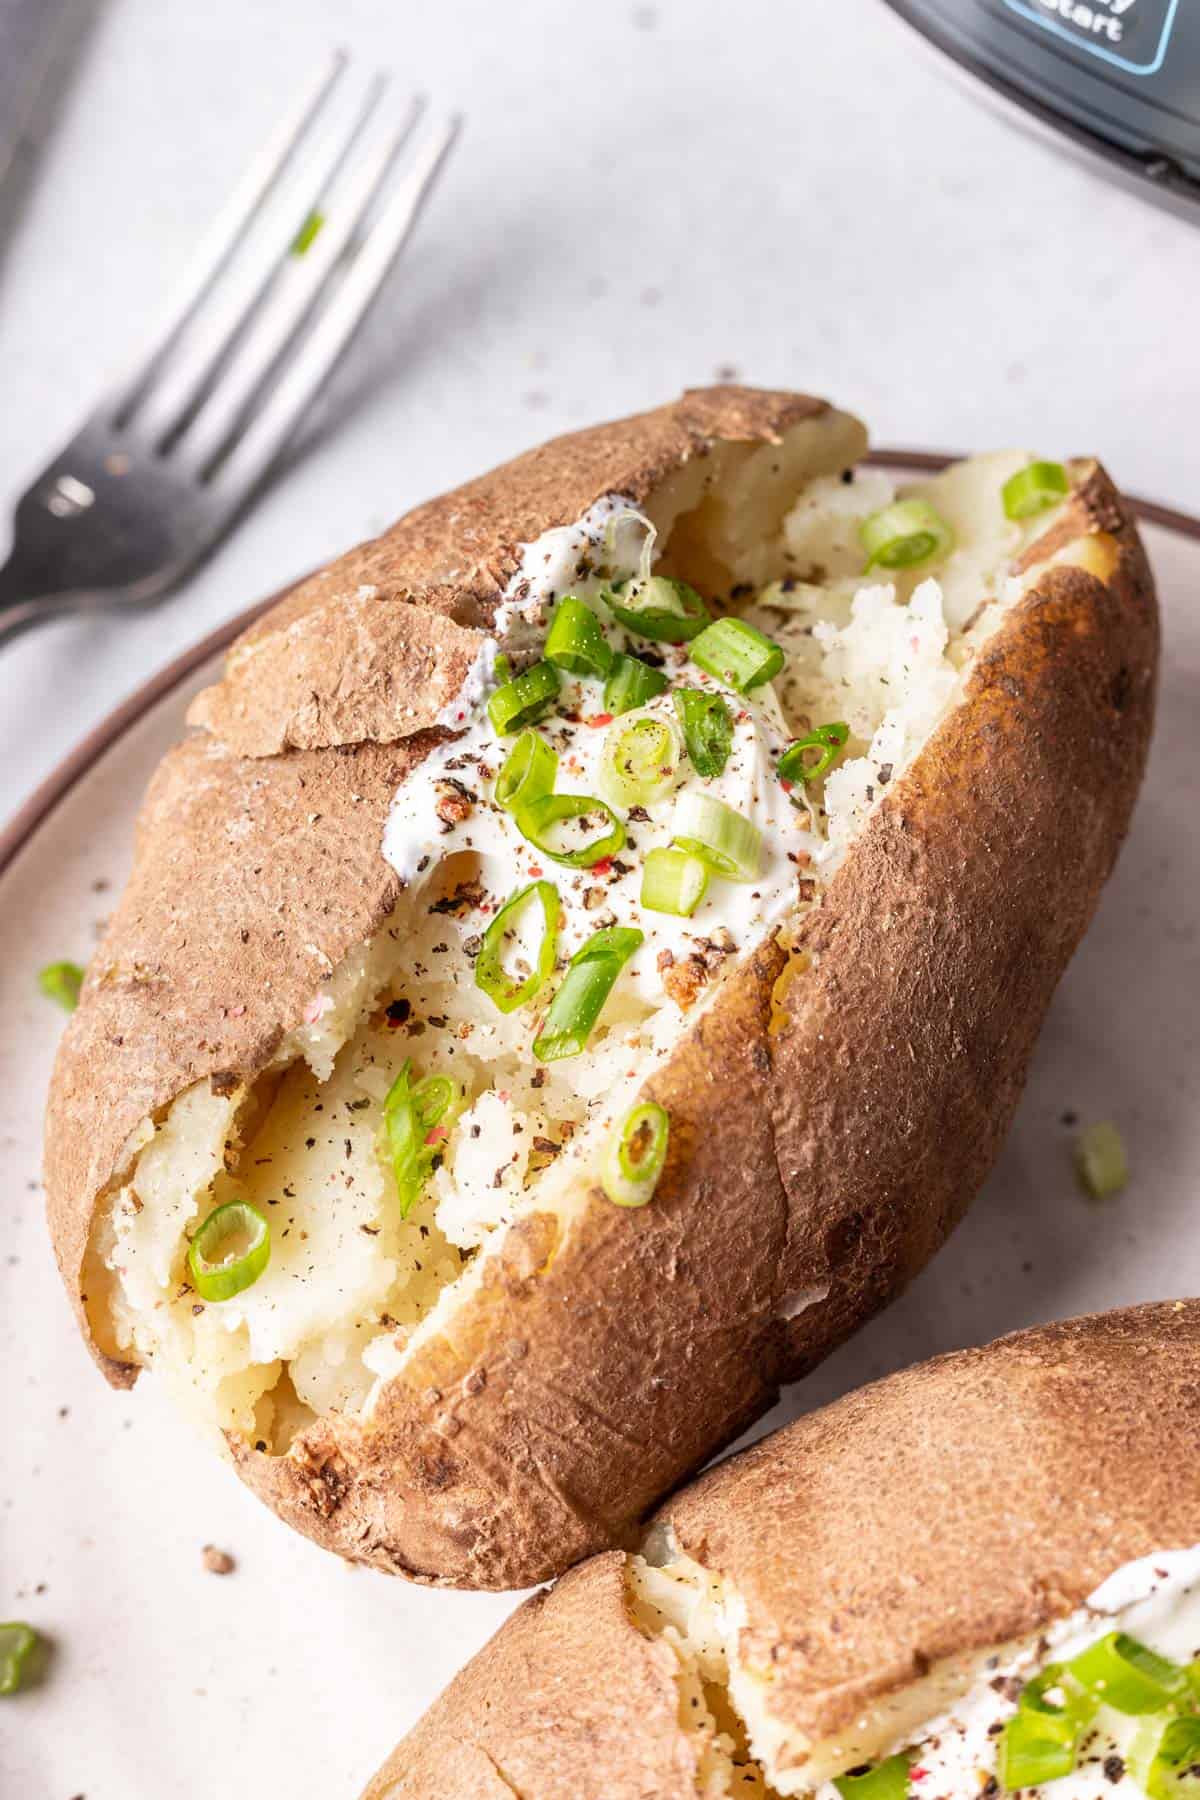 Baked potato loaded with sour cream, green onion, and seasonings on plate.